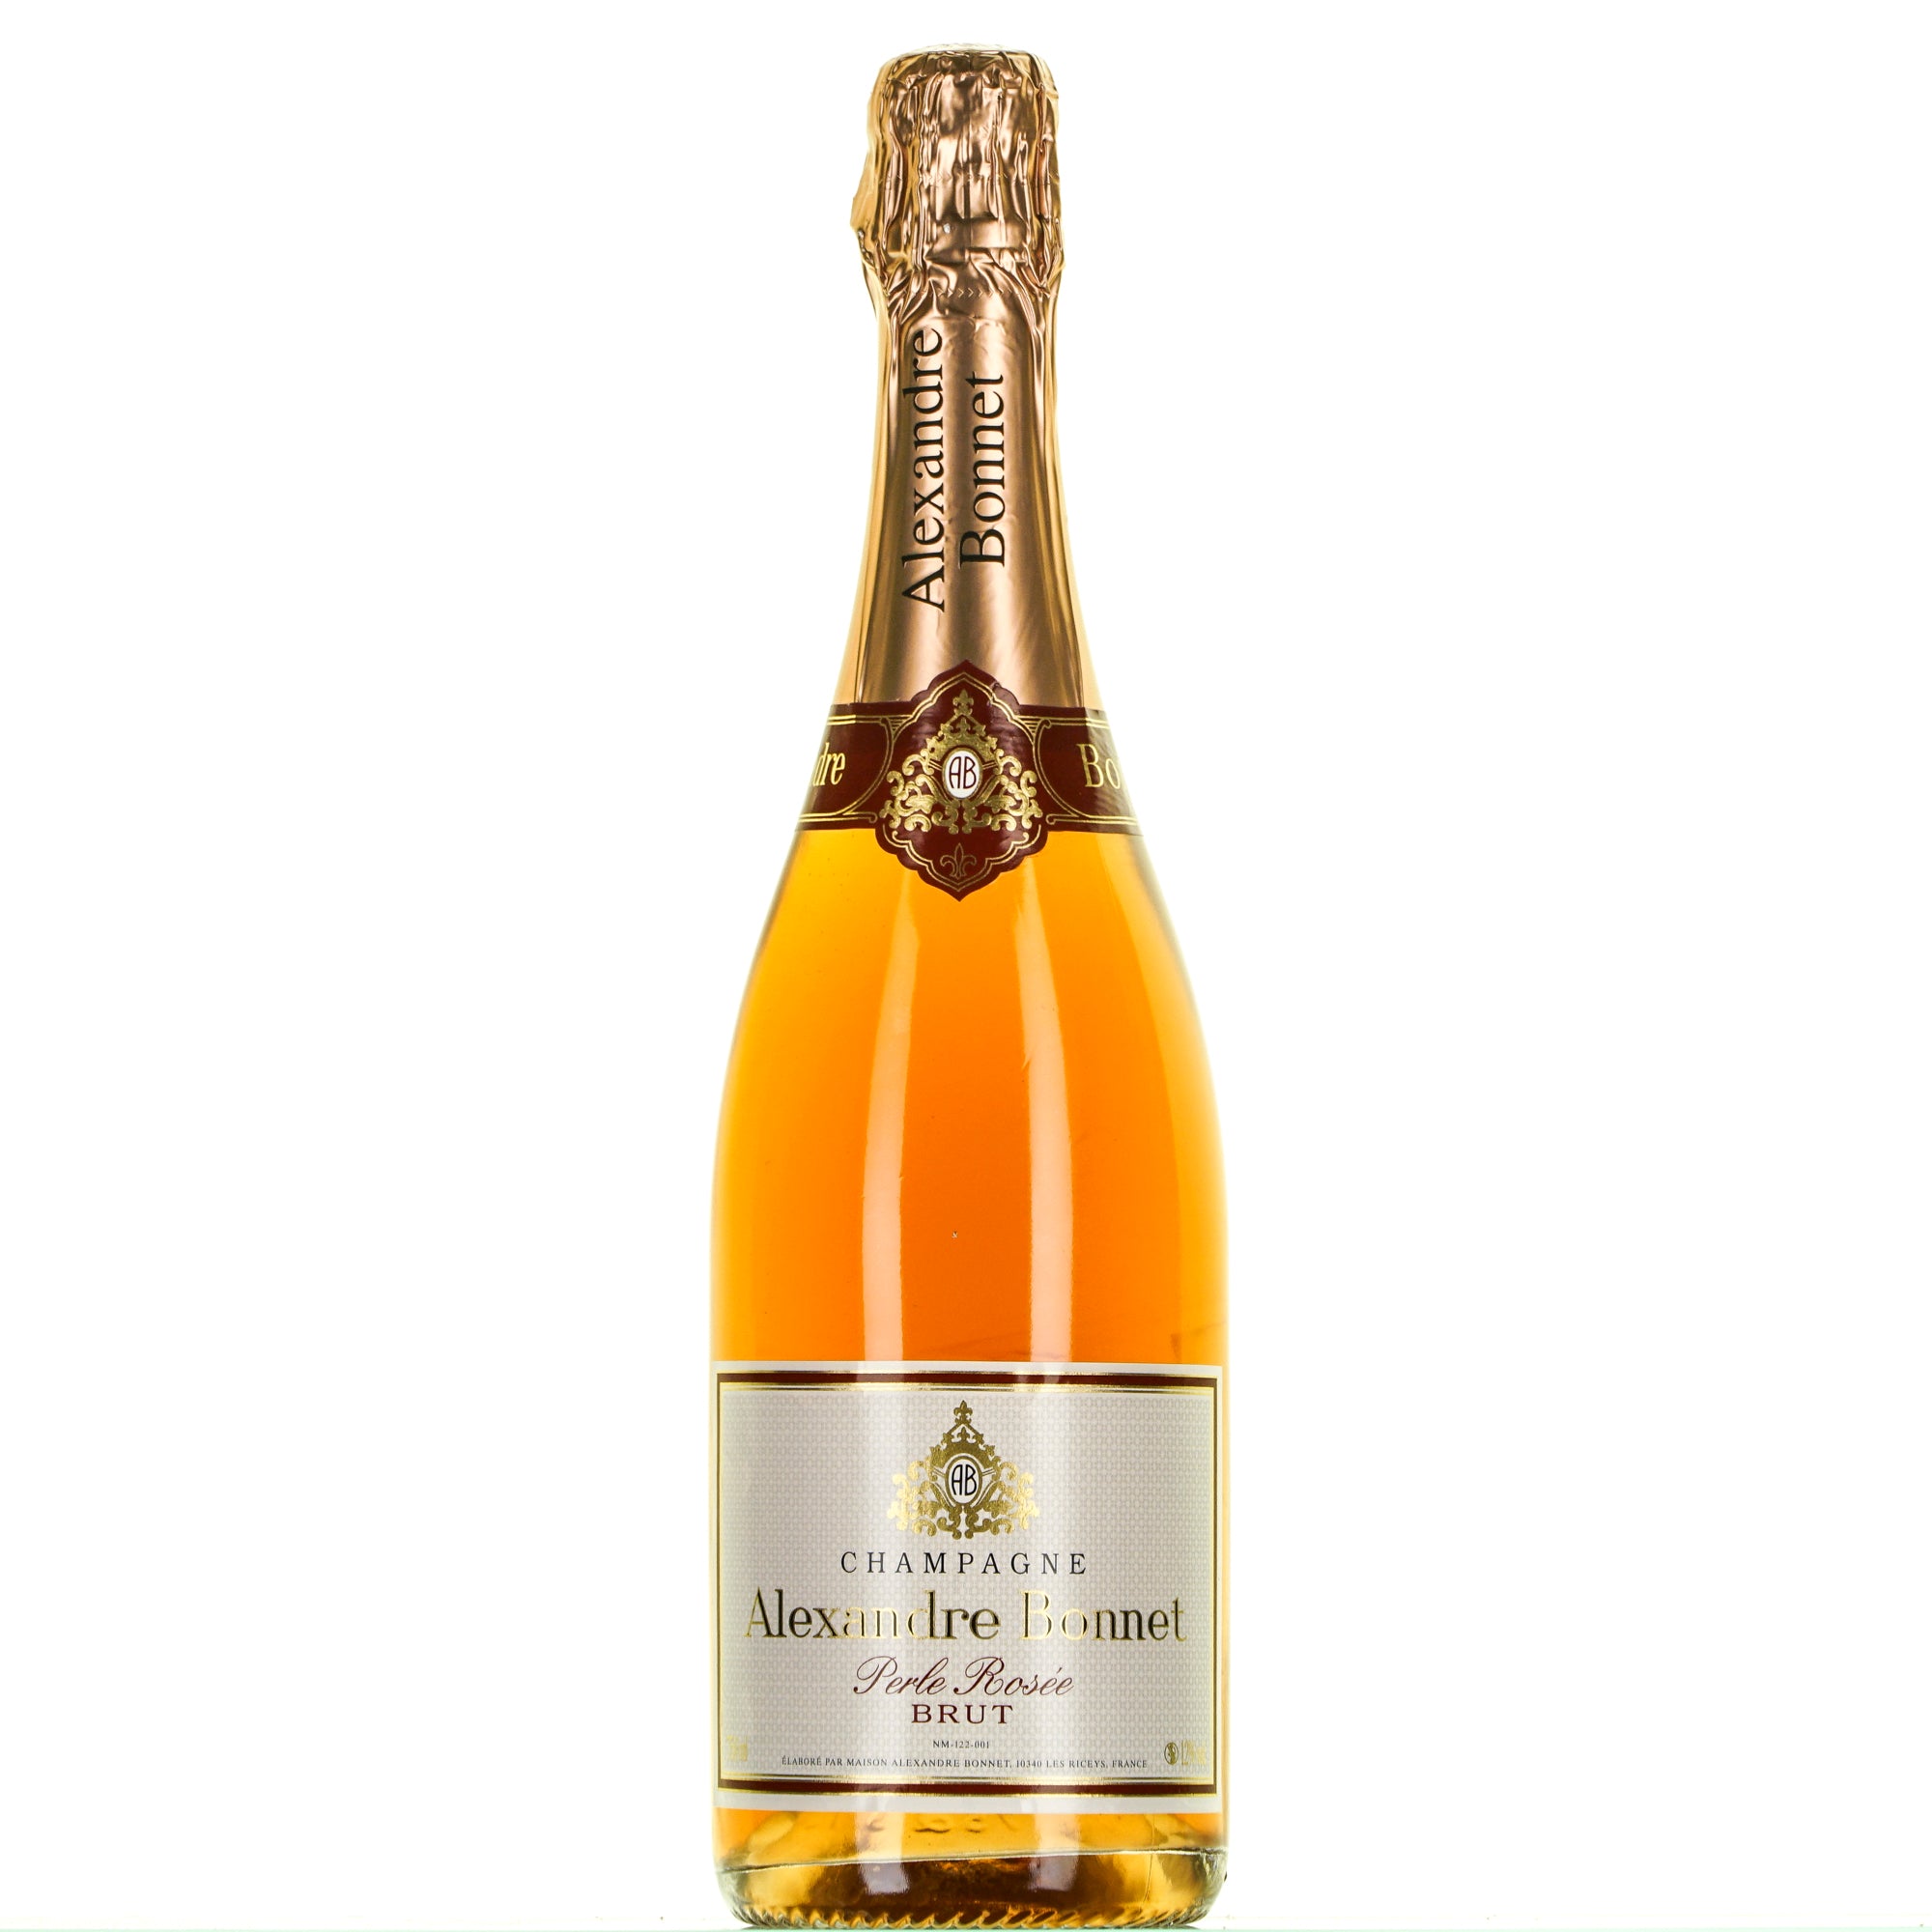 CHAMPAGNE PERLE ROSEE BRUT lt.0,750 old disgorgement